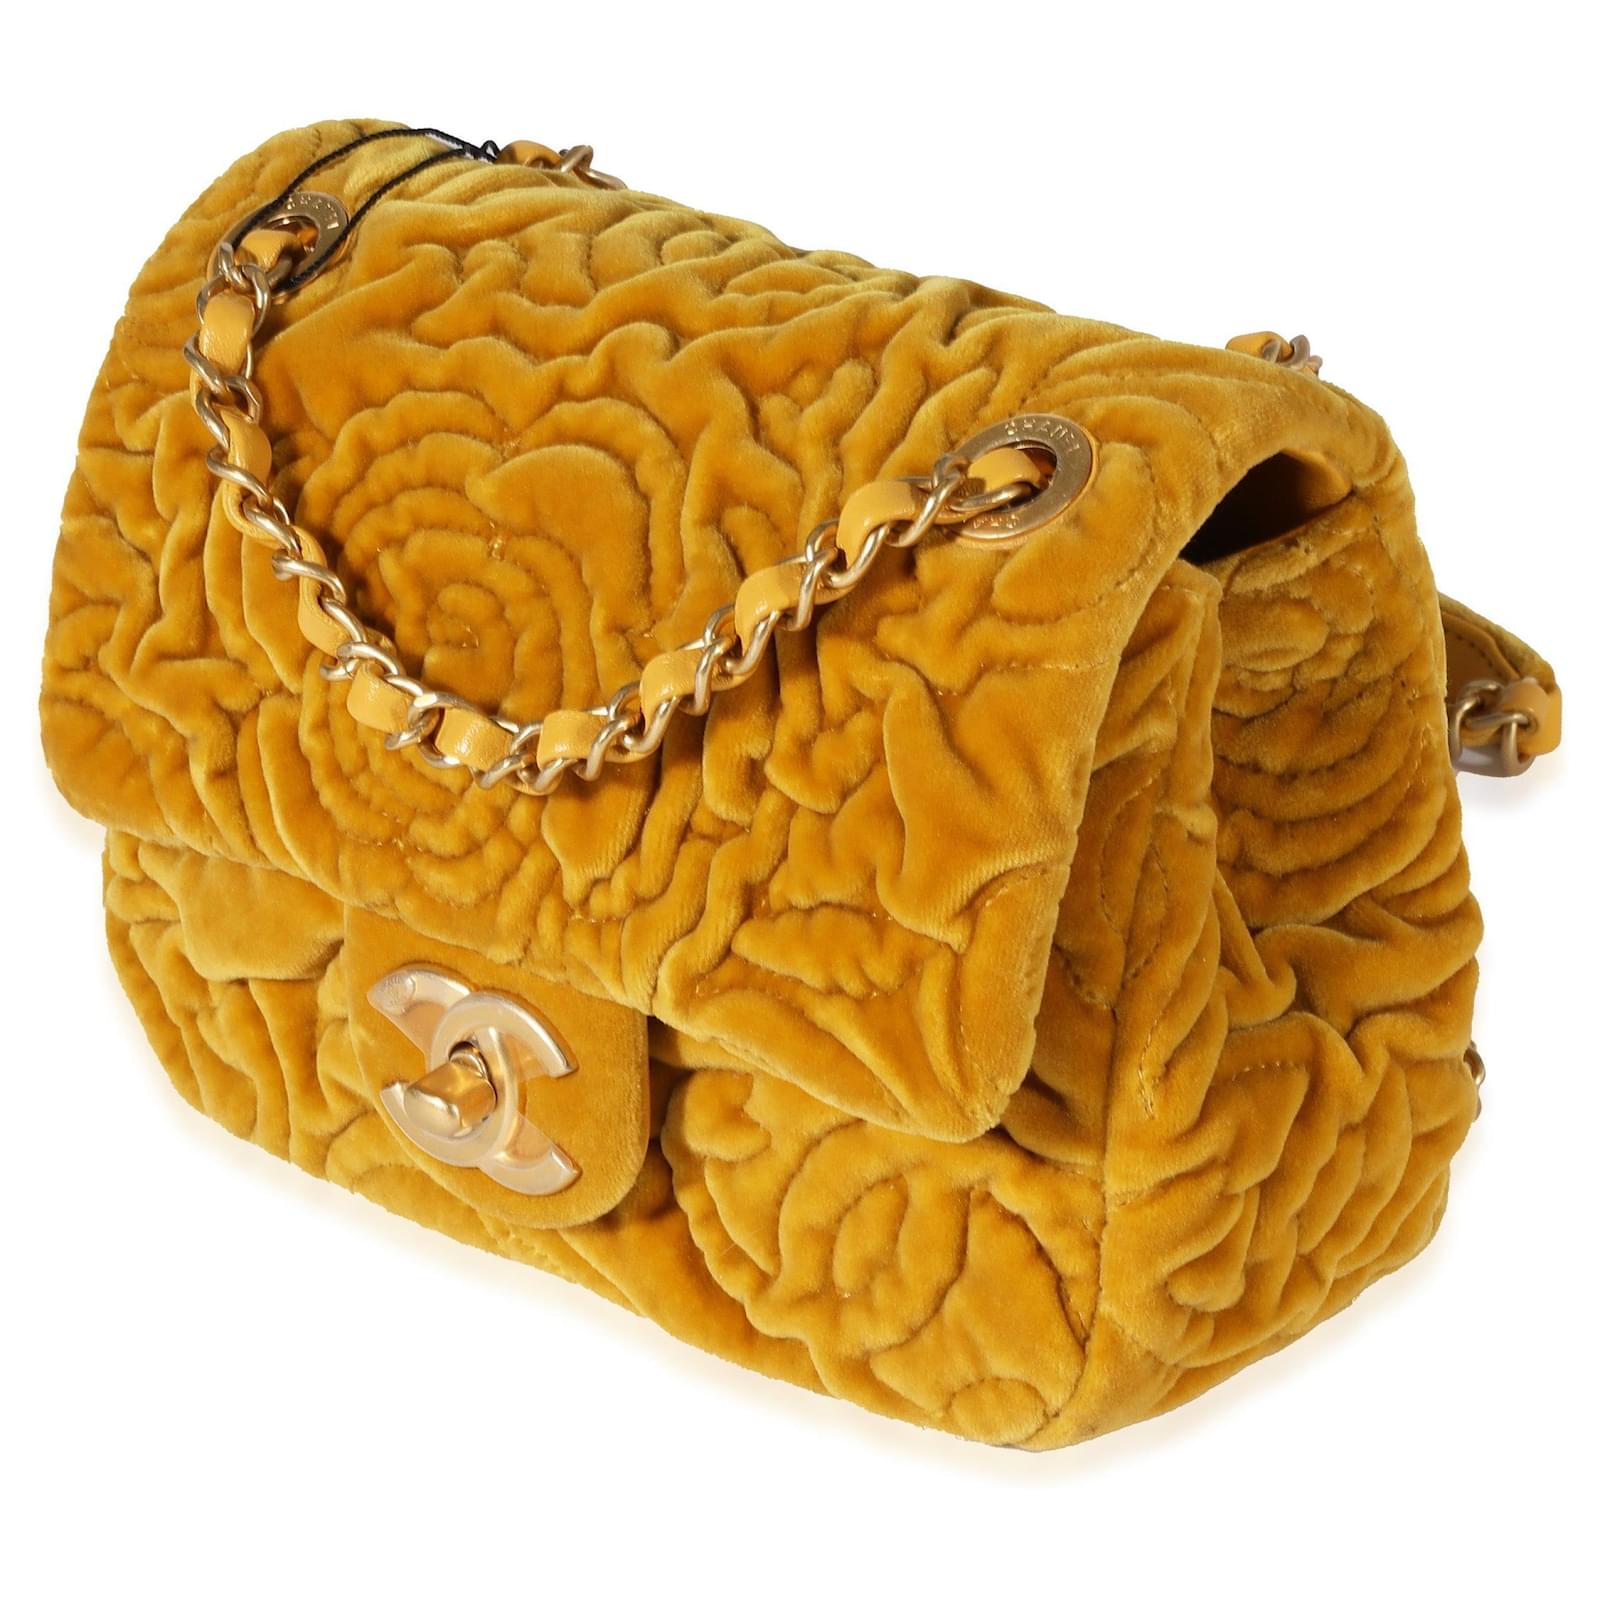 It was all yellow 💛 This Chanel Soft Shell Flap Bag comes with a